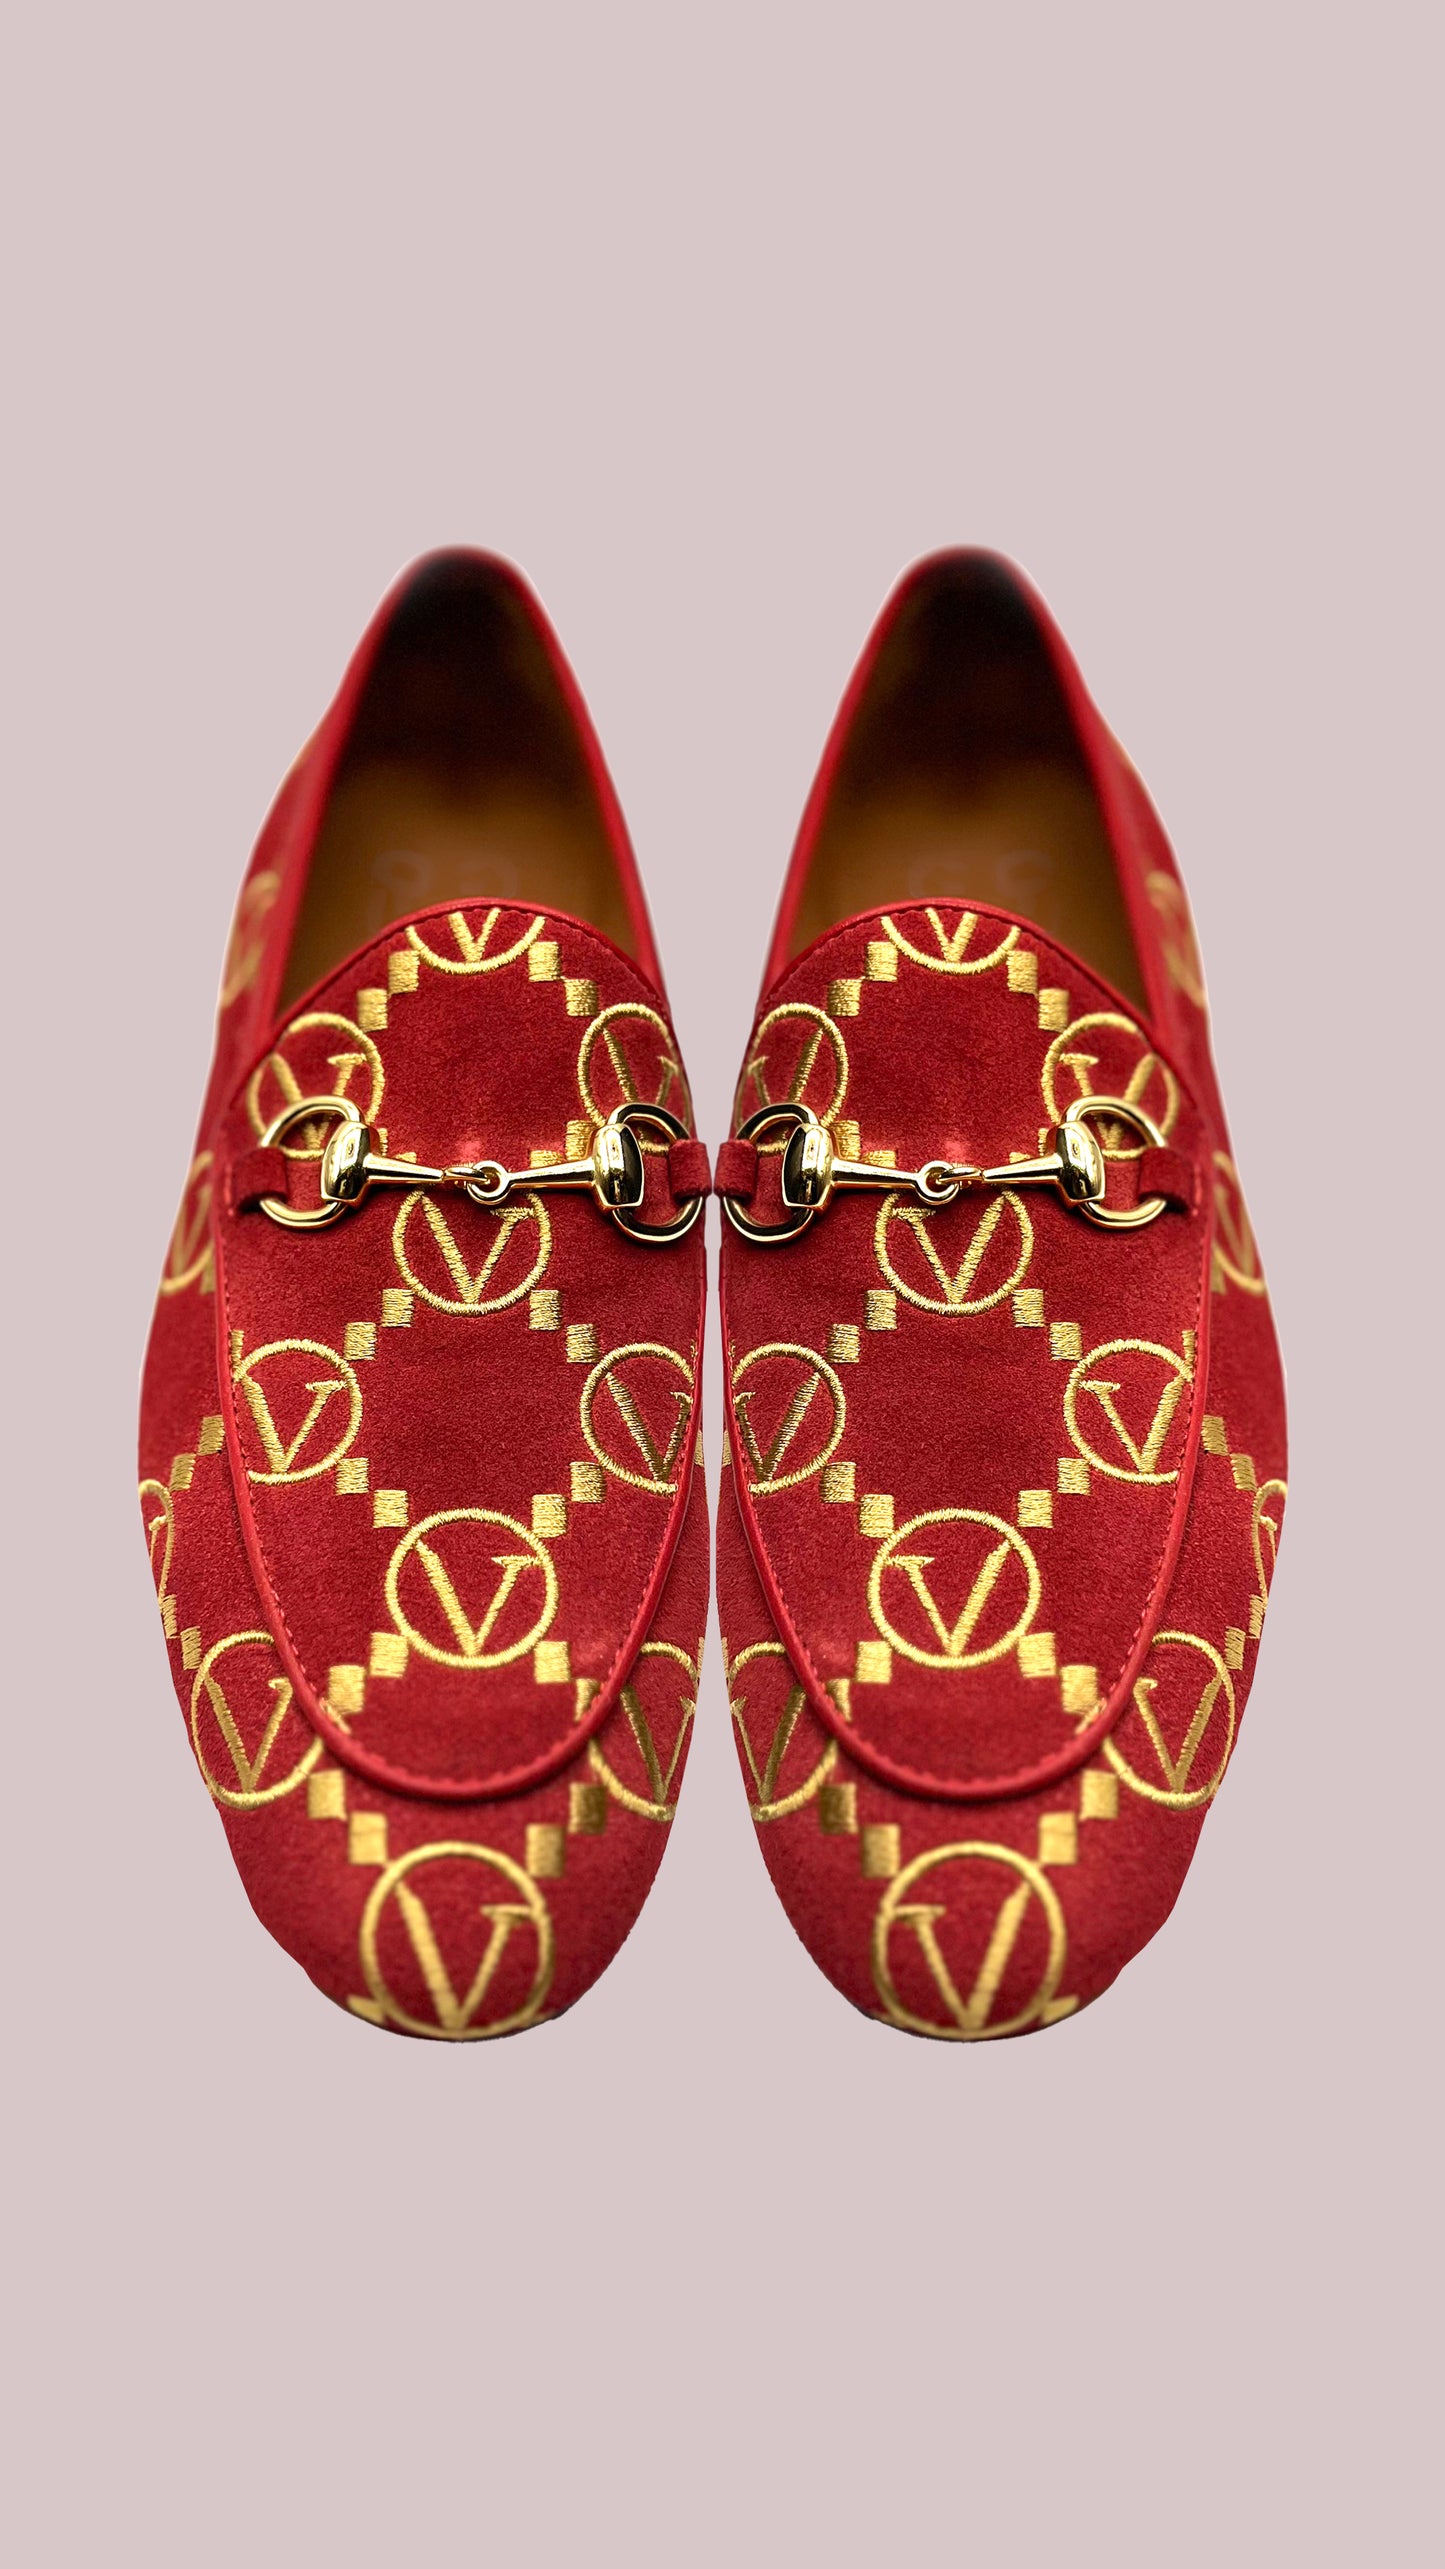 Red shoes v sign SHOES Ph inventory shoes Vercini